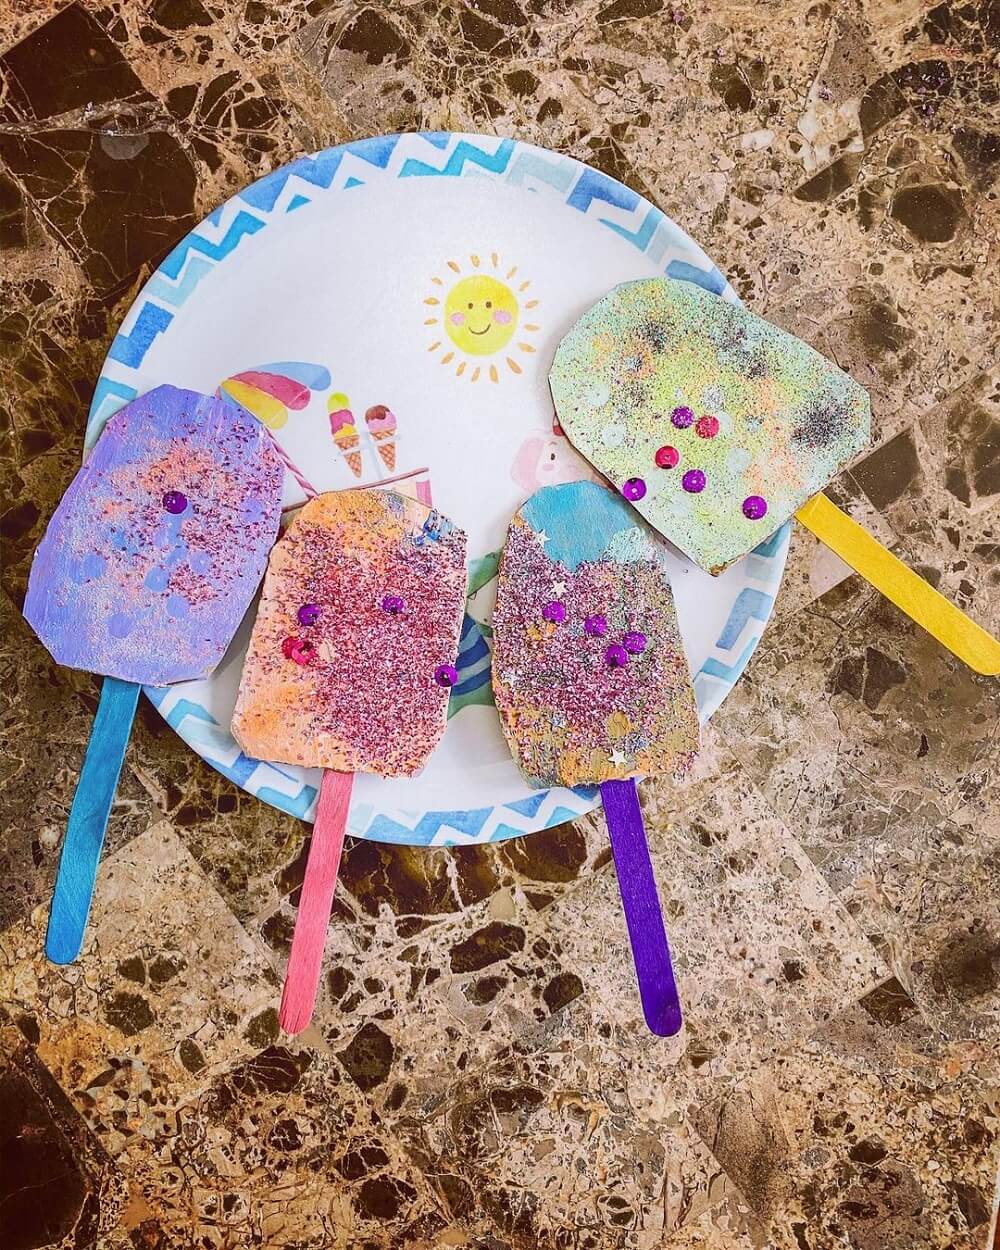 Four painted popsicles made from glitter and cardboard.